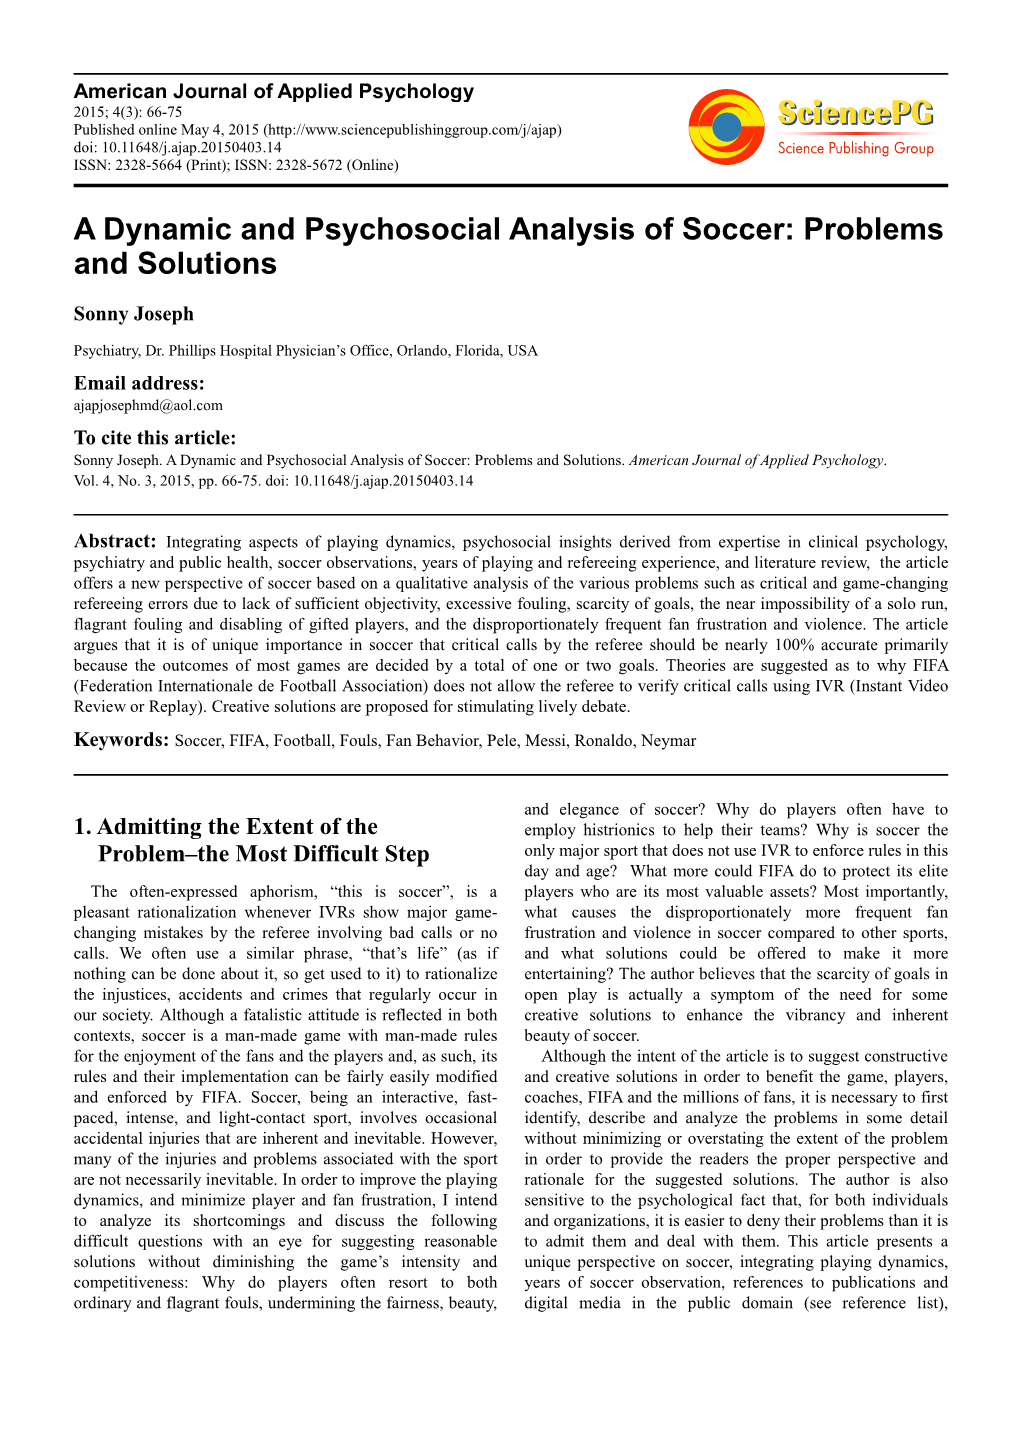 A Dynamic and Psychosocial Analysis of Soccer: Problems and Solutions